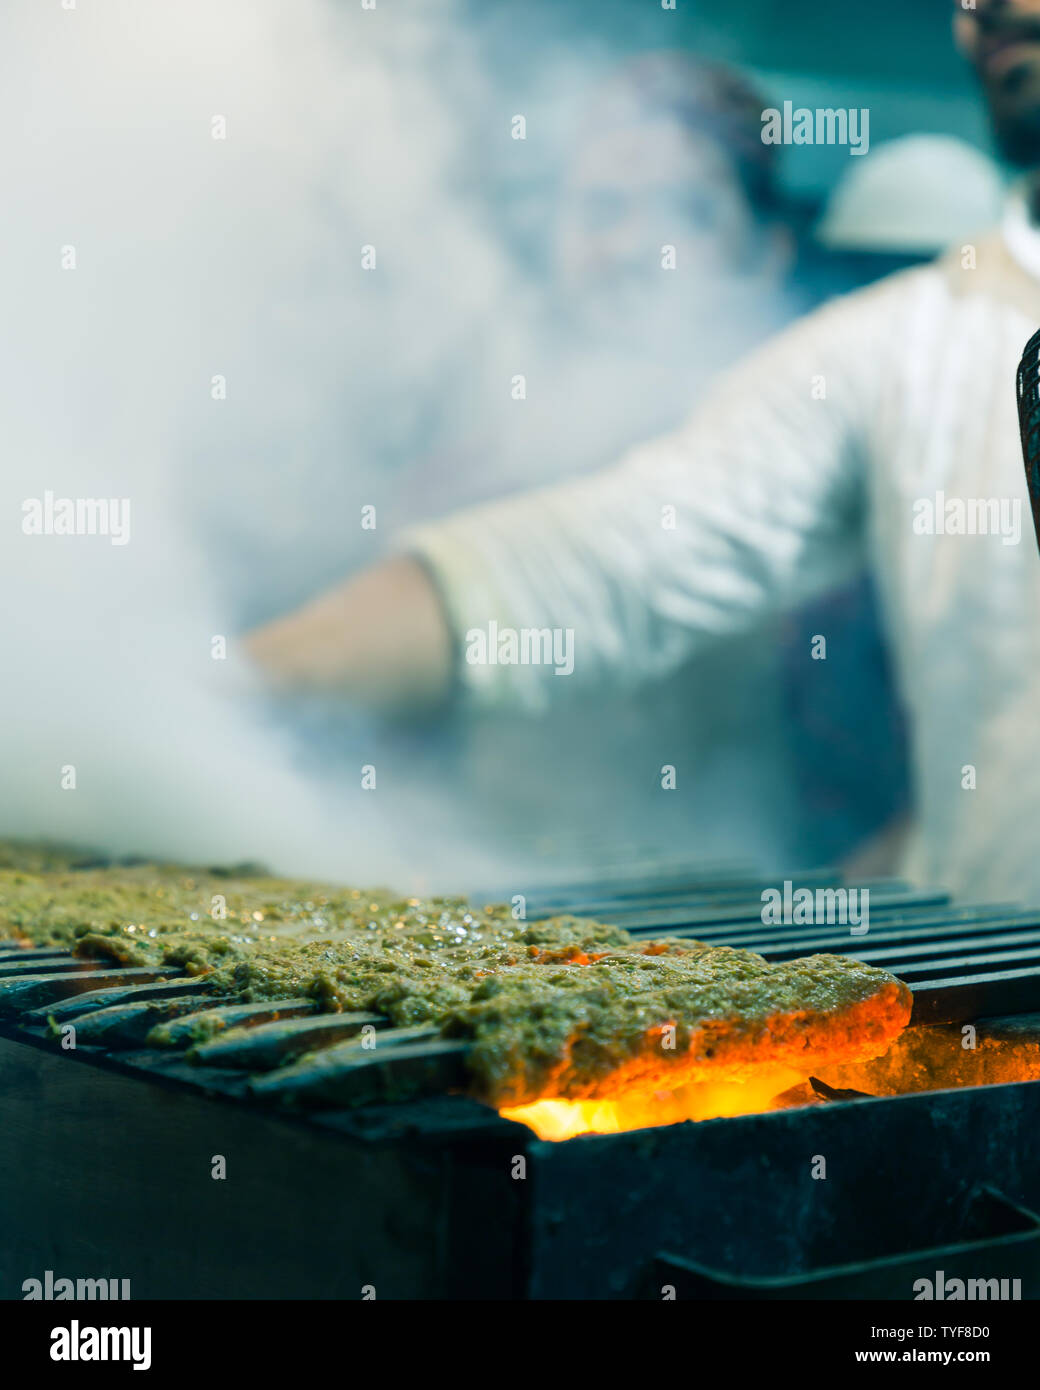 Man grilling Kebabs over charcoal grill with smoke at Qureshi Kabab Corner in Old Delhi India Stock Photo